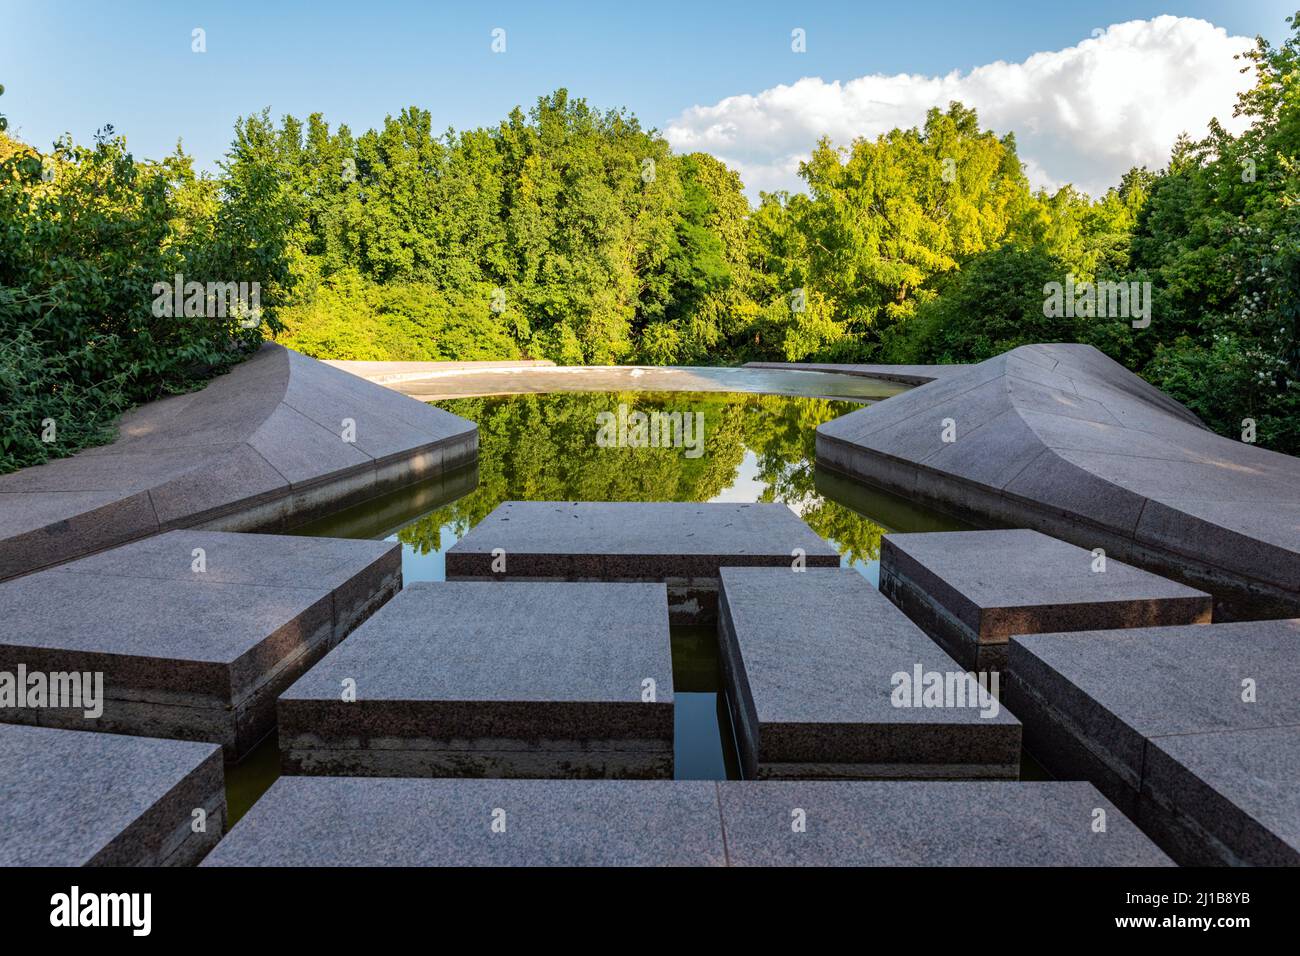 GARDEN OF THE ARMED FORCES OF THE UNITED STATES OF AMERICA, CAEN, CALVADOS, NORMANDY, FRANCE Stock Photo